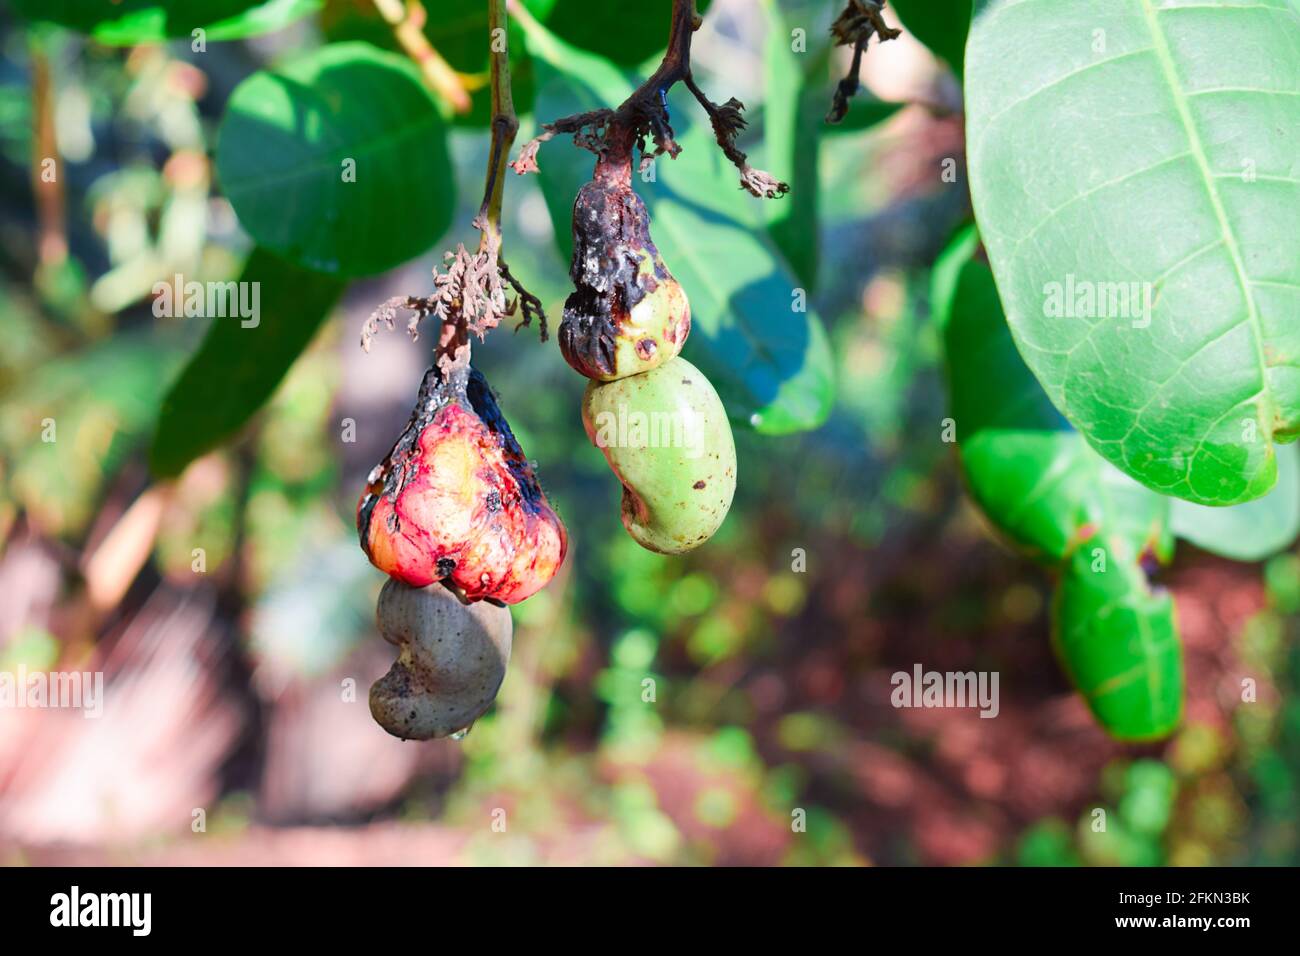 Bug attacked cashew fruits with nuts hanging on a tree branch in Asia Stock Photo